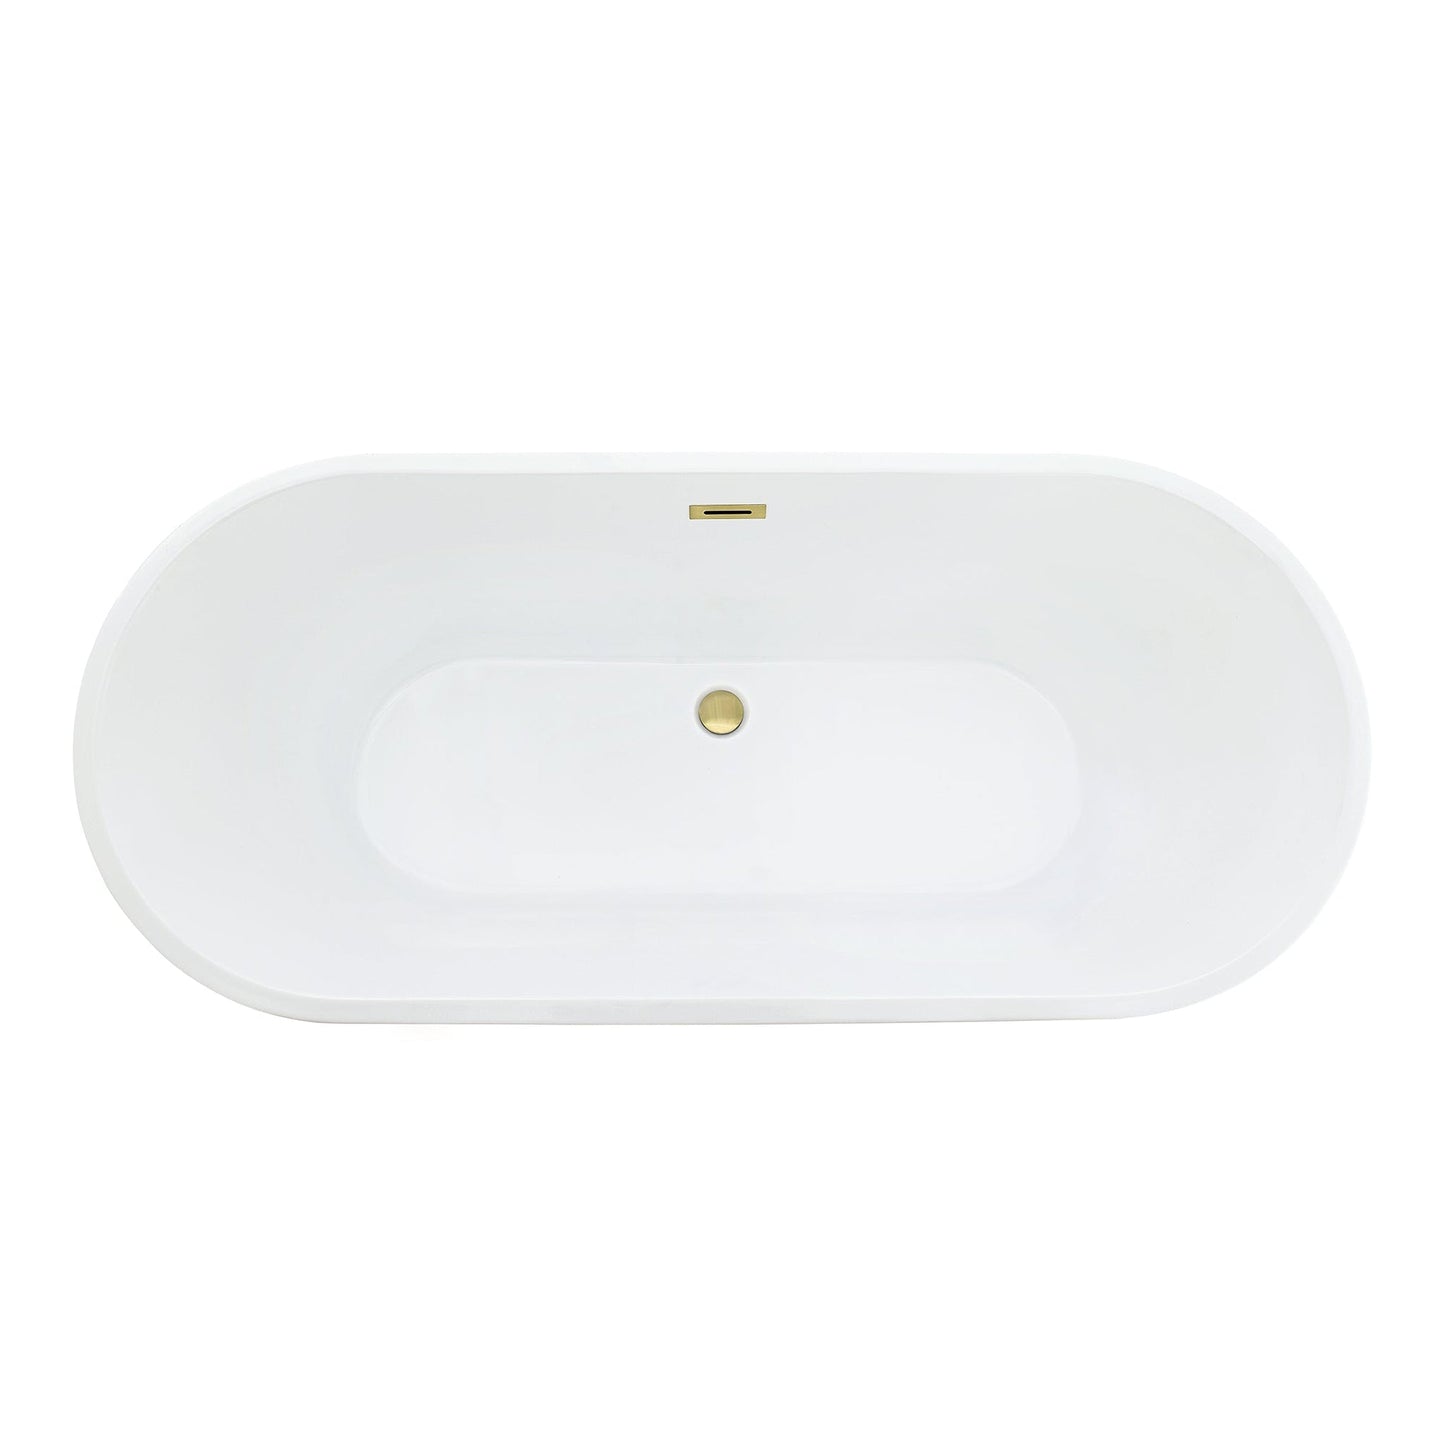 Altair Blarn 65" x 29" White Acrylic Freestanding Bathtub With Drain and Overflow